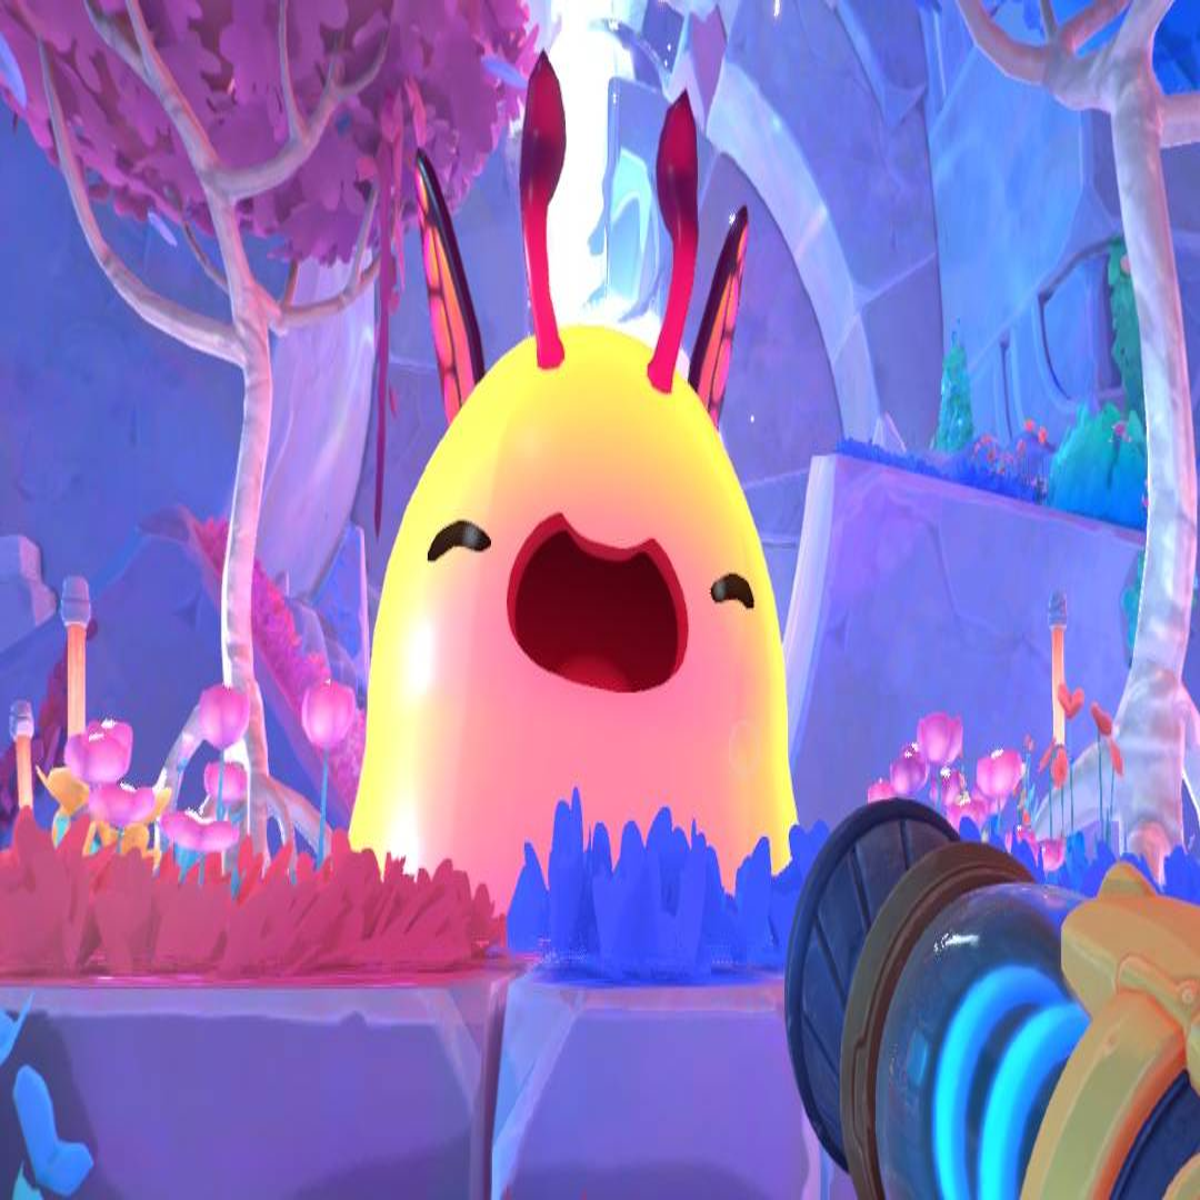 Slime Rancher 2: Where to find Ringtail slimes